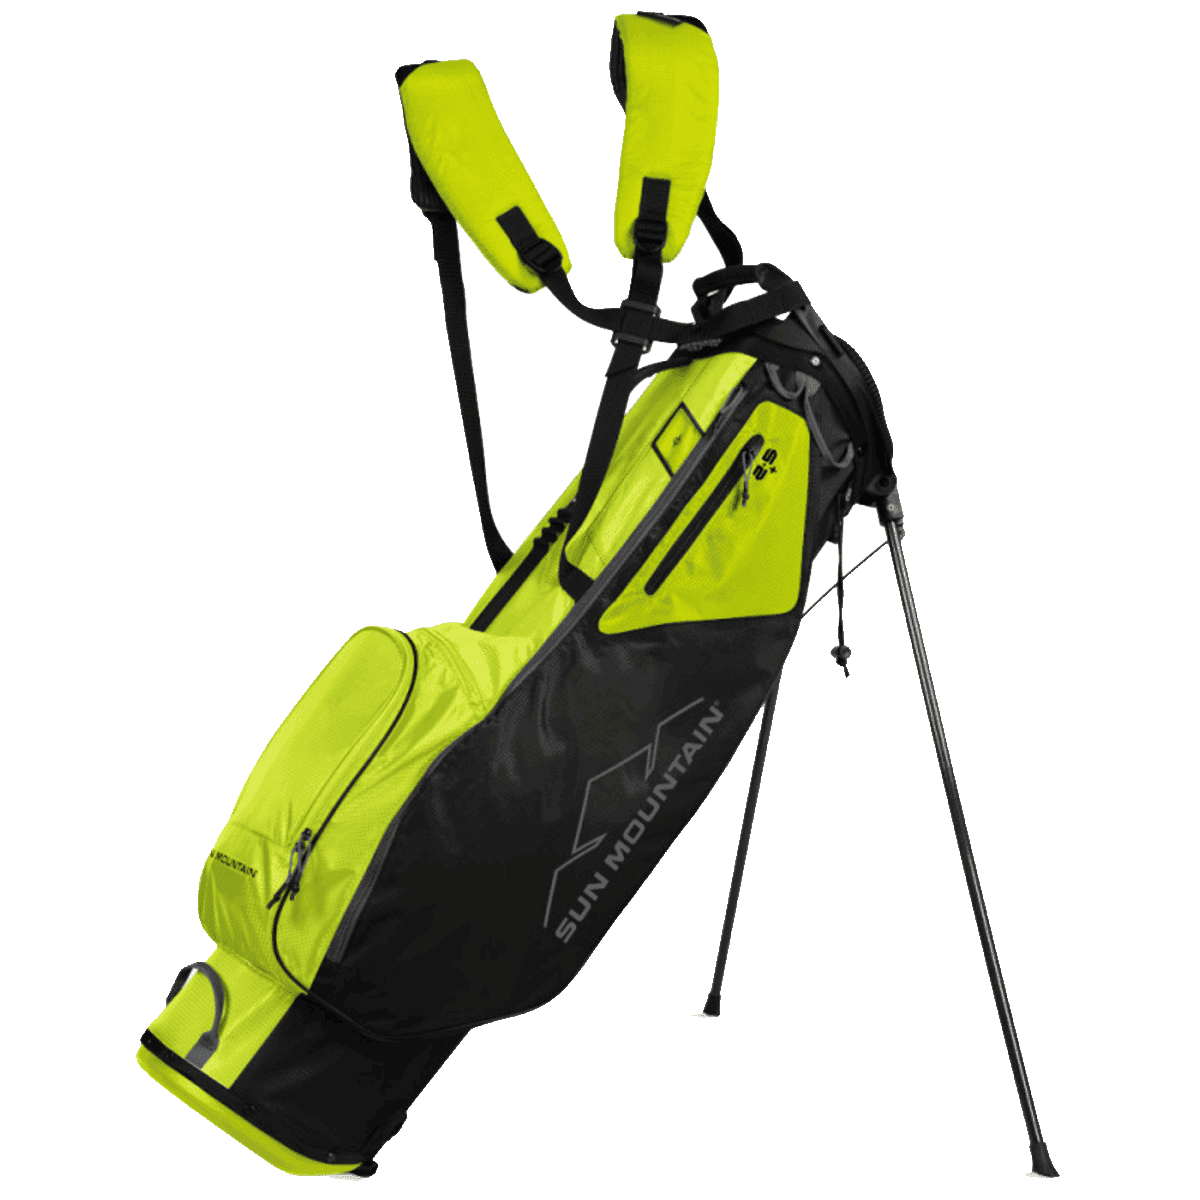 Sun Mountain Two5 Plus carry bag review